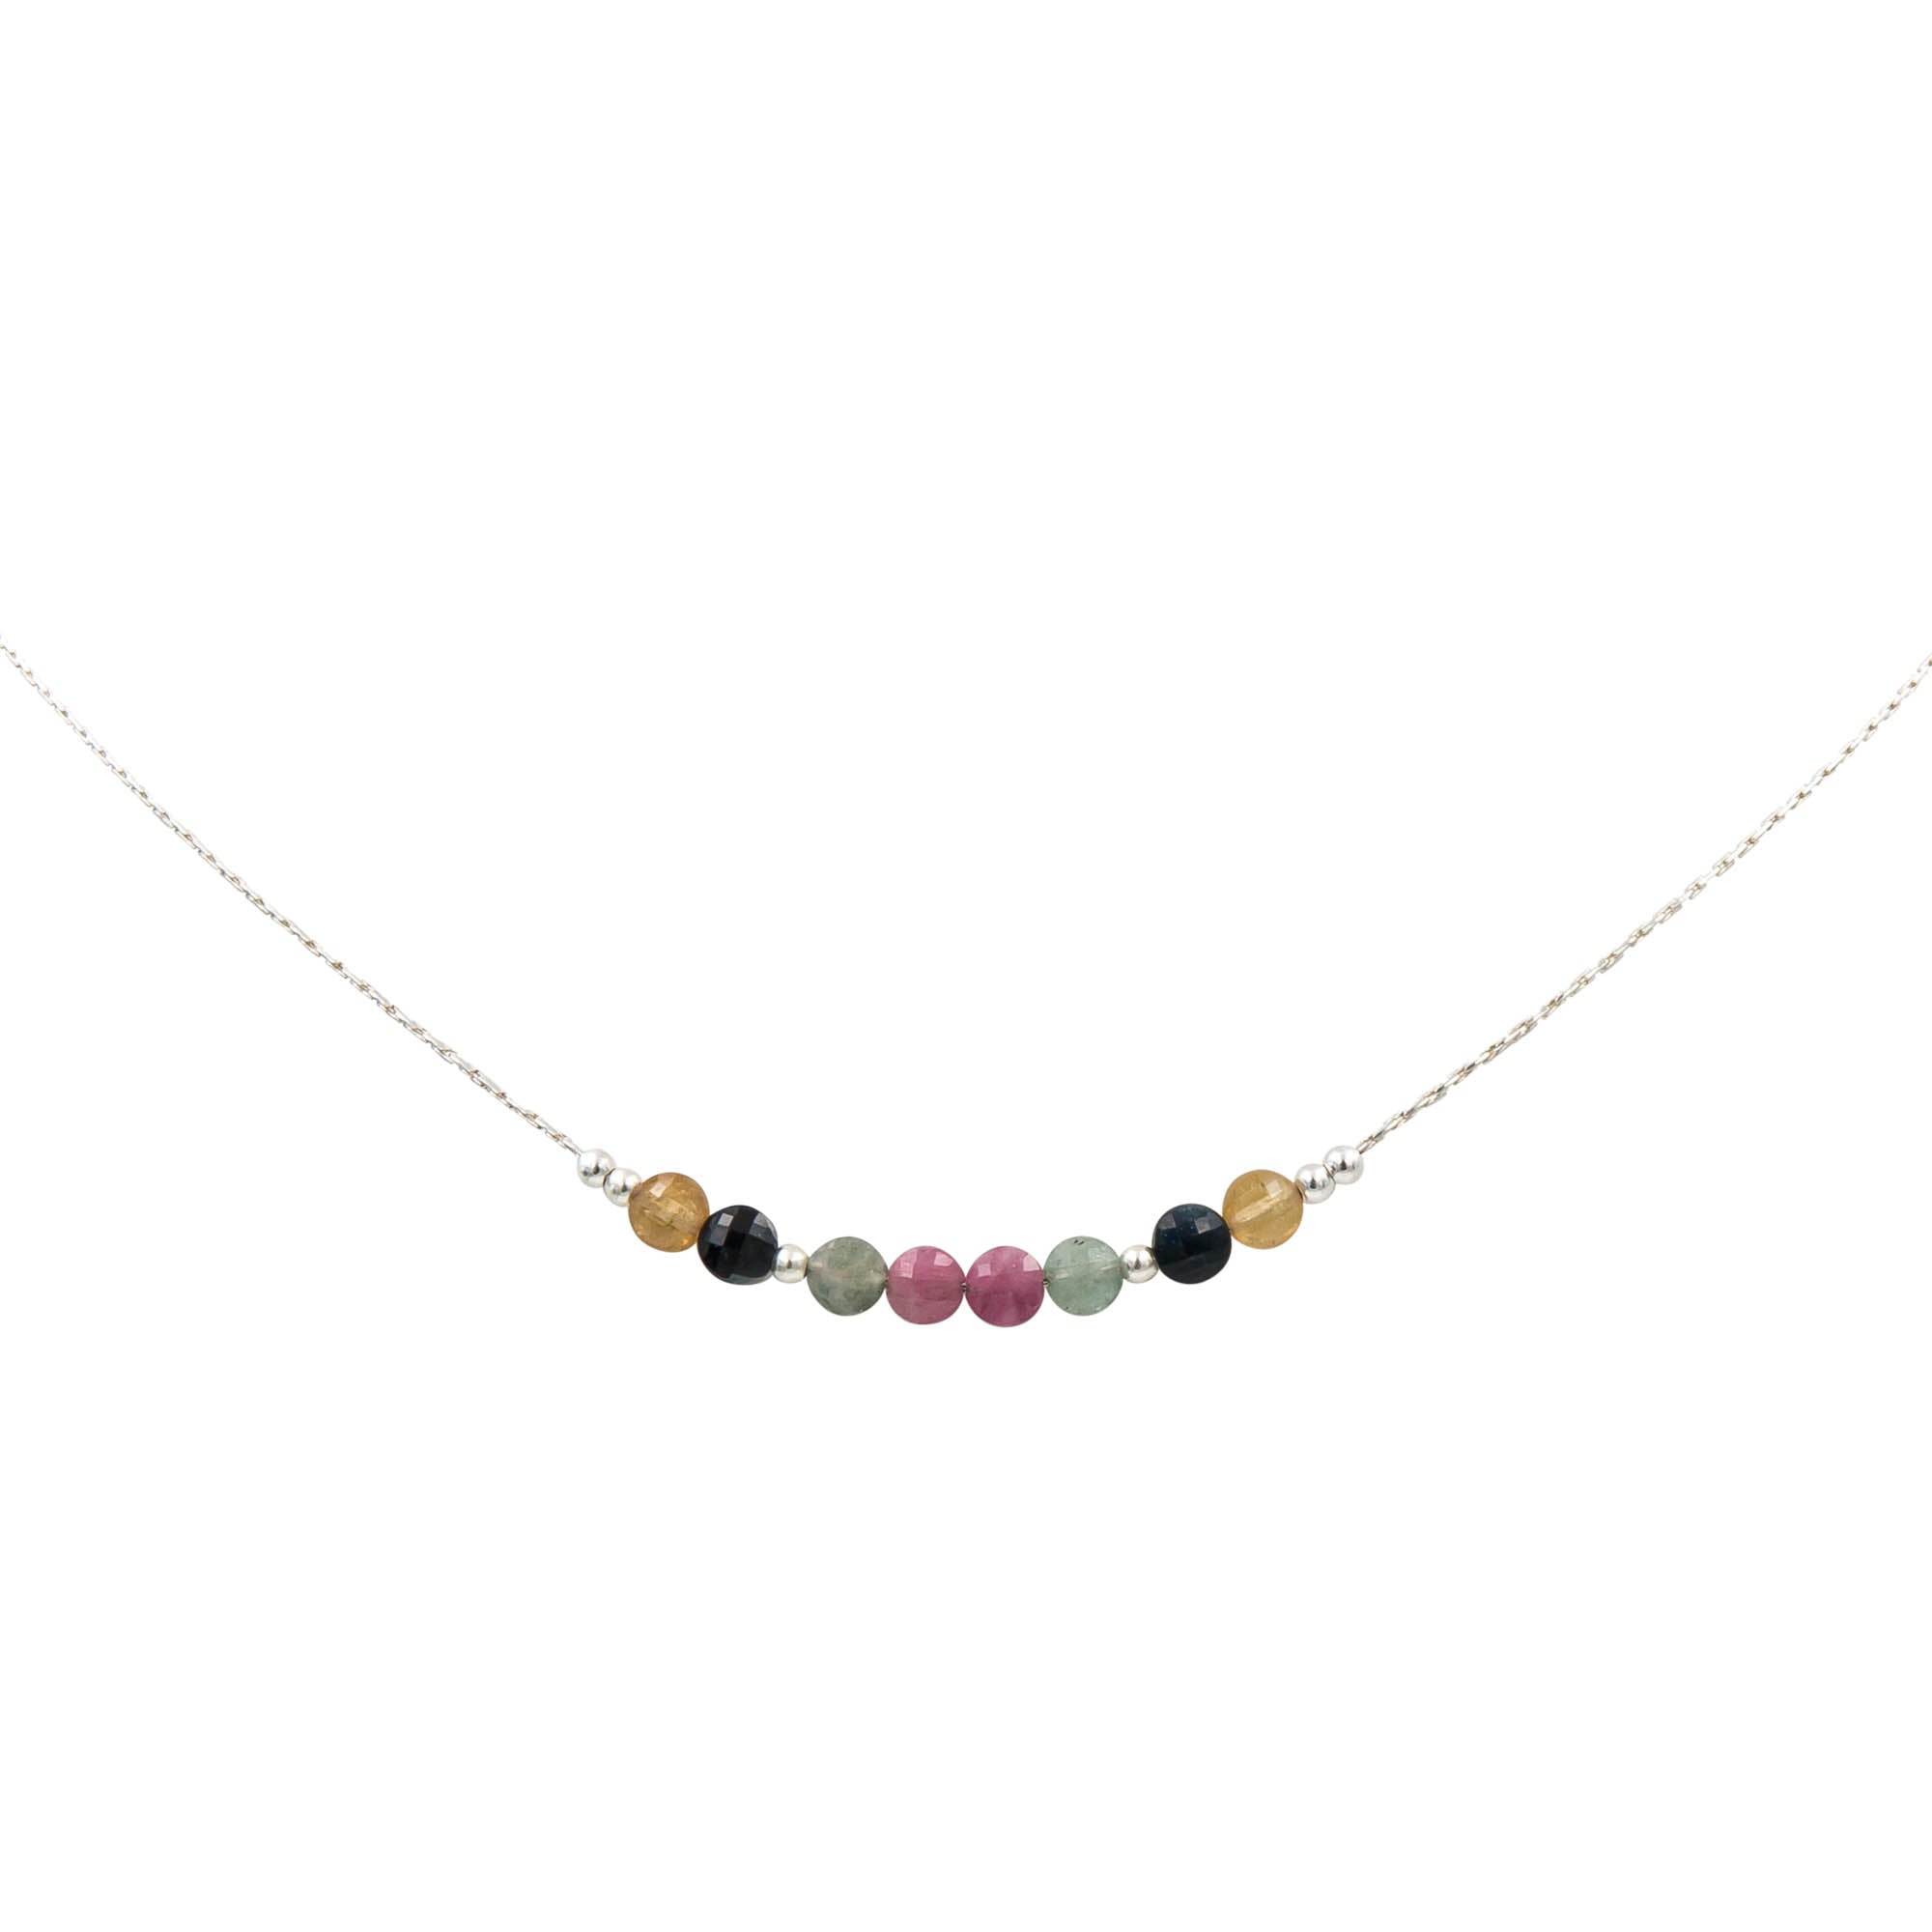 Earth Song Jewelry ~ Multicolor Tourmaline Natural Stone ~ Sterling Silver Handmade Necklace